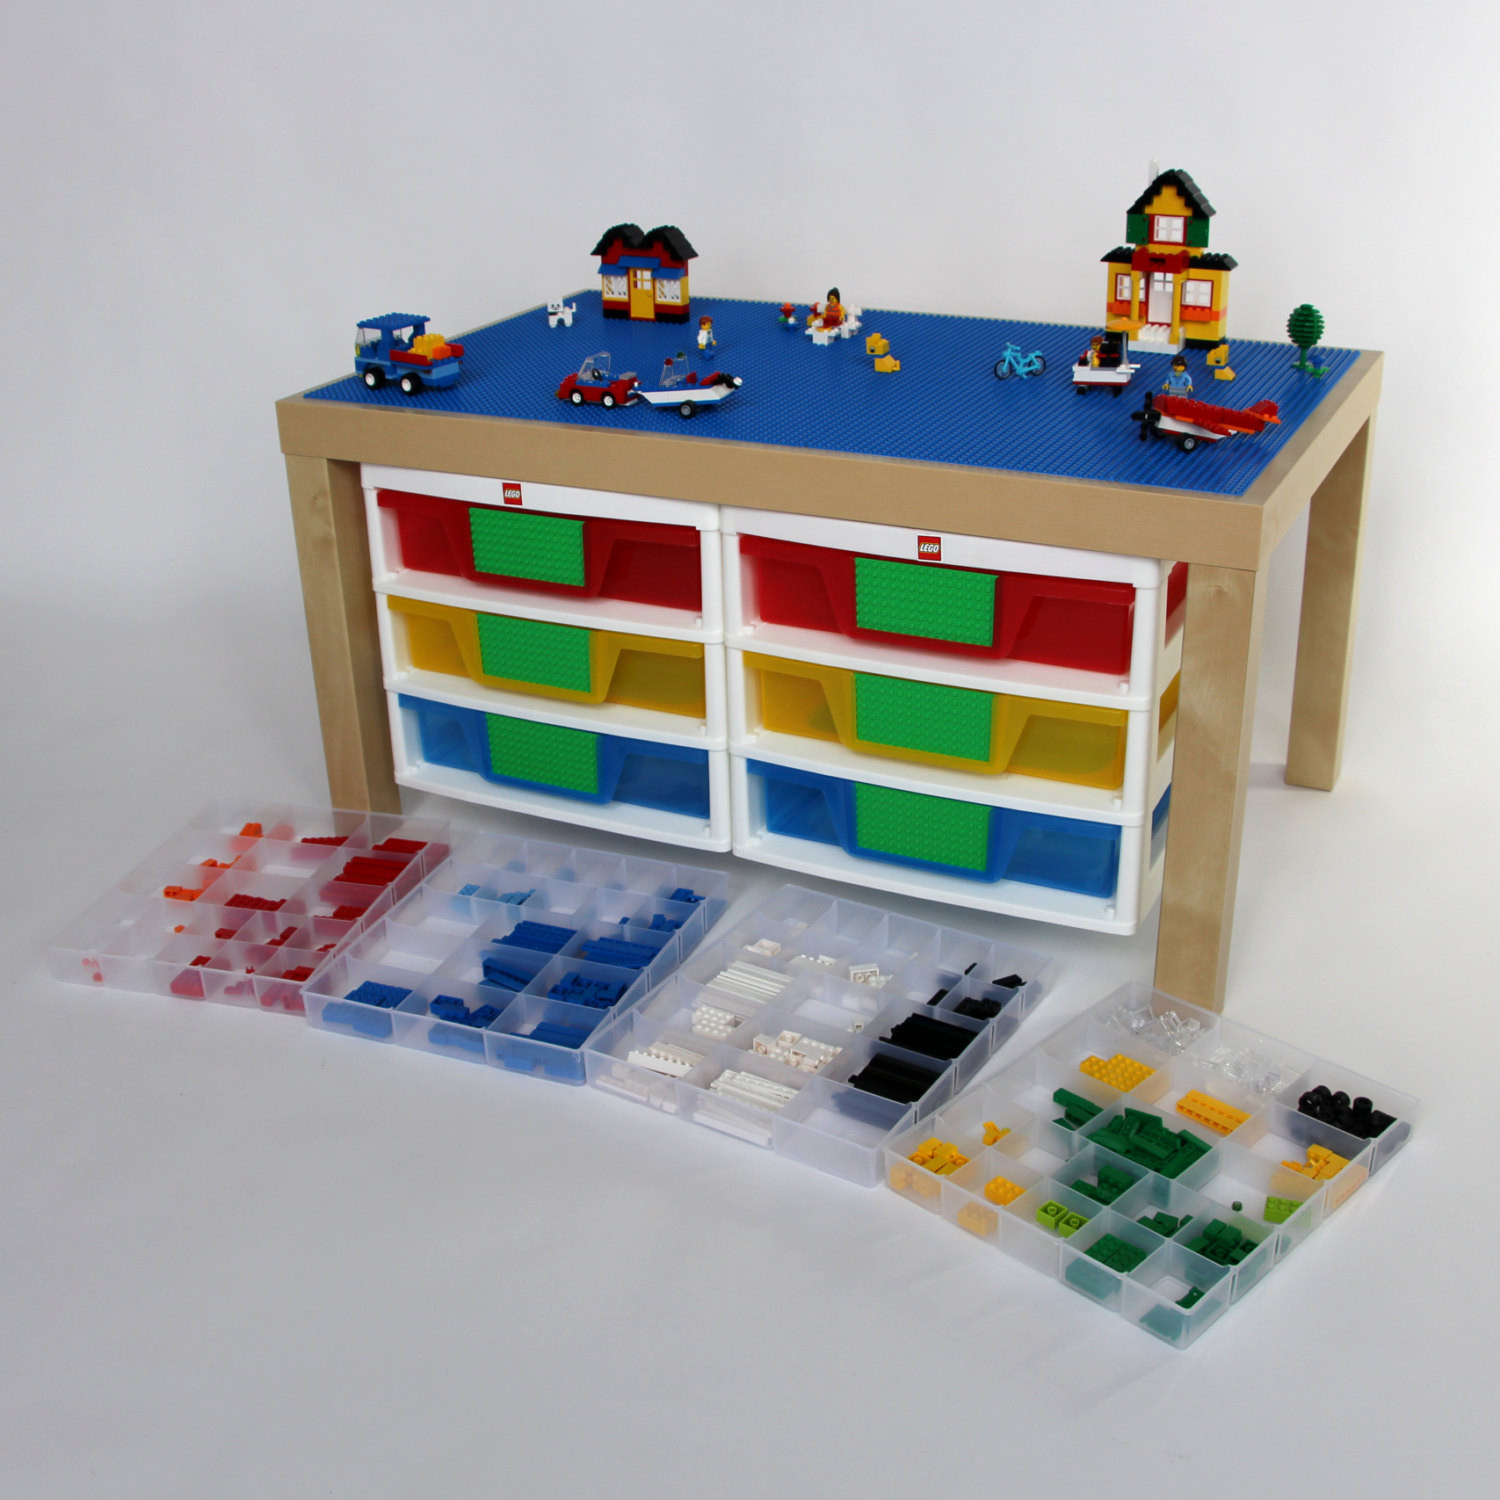 Kids Lego Table
 Play Table for Construction Toys with 6 by